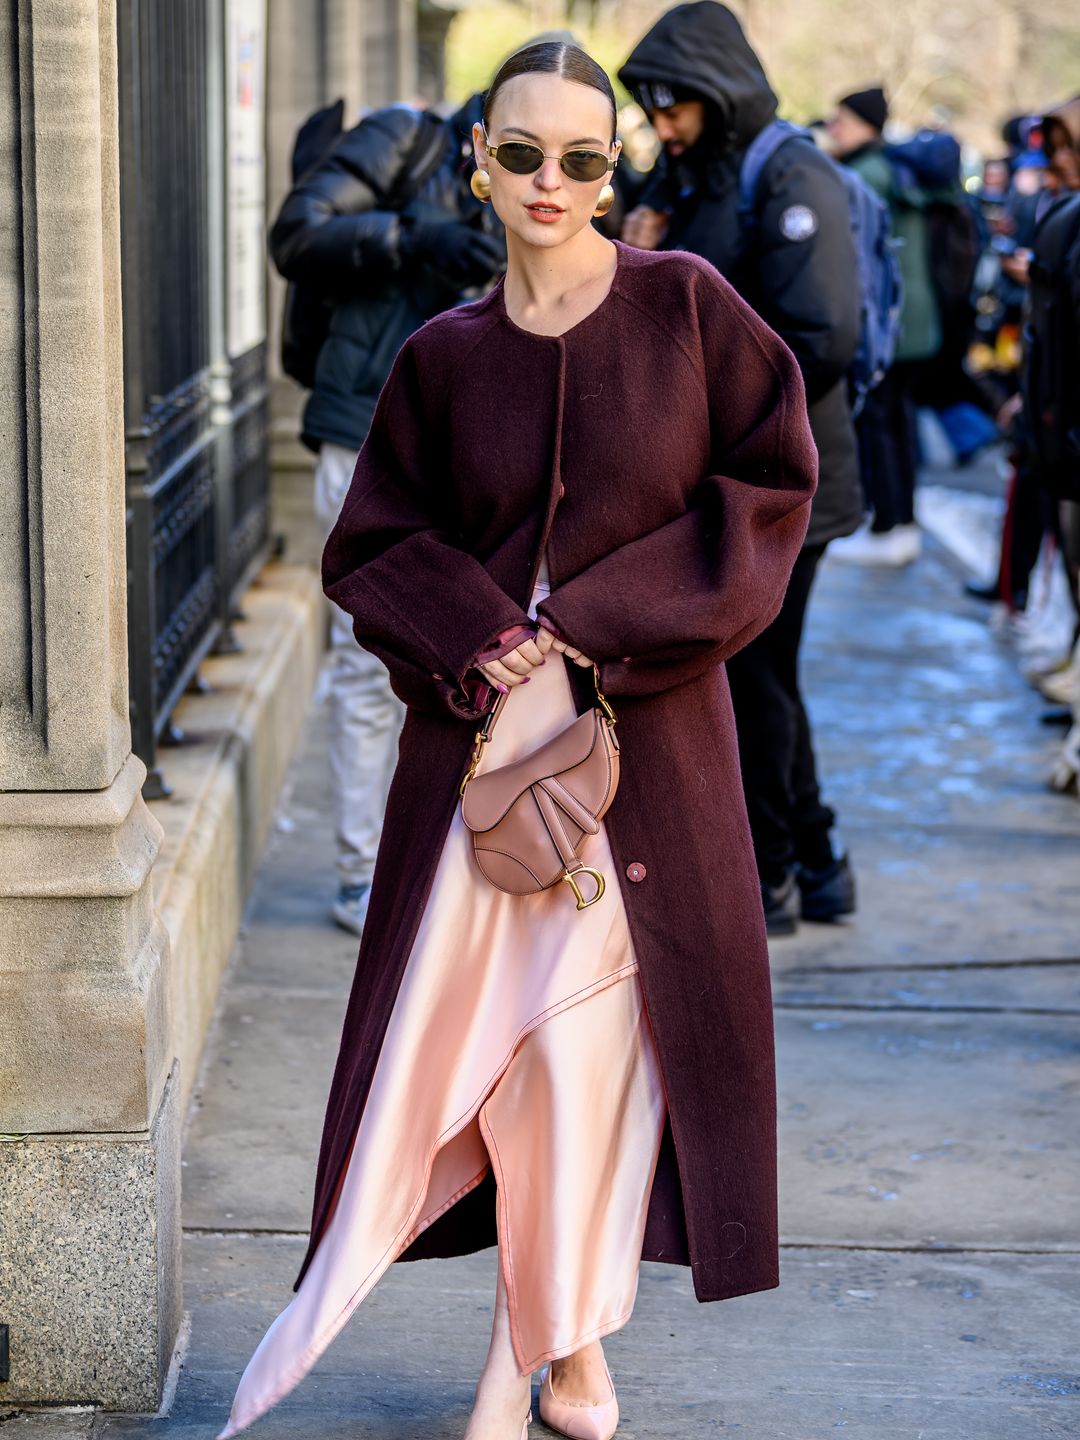 Abi Hoffman wears a purple coat and a pink ensemble as she poses outside the Bevza Fashion show